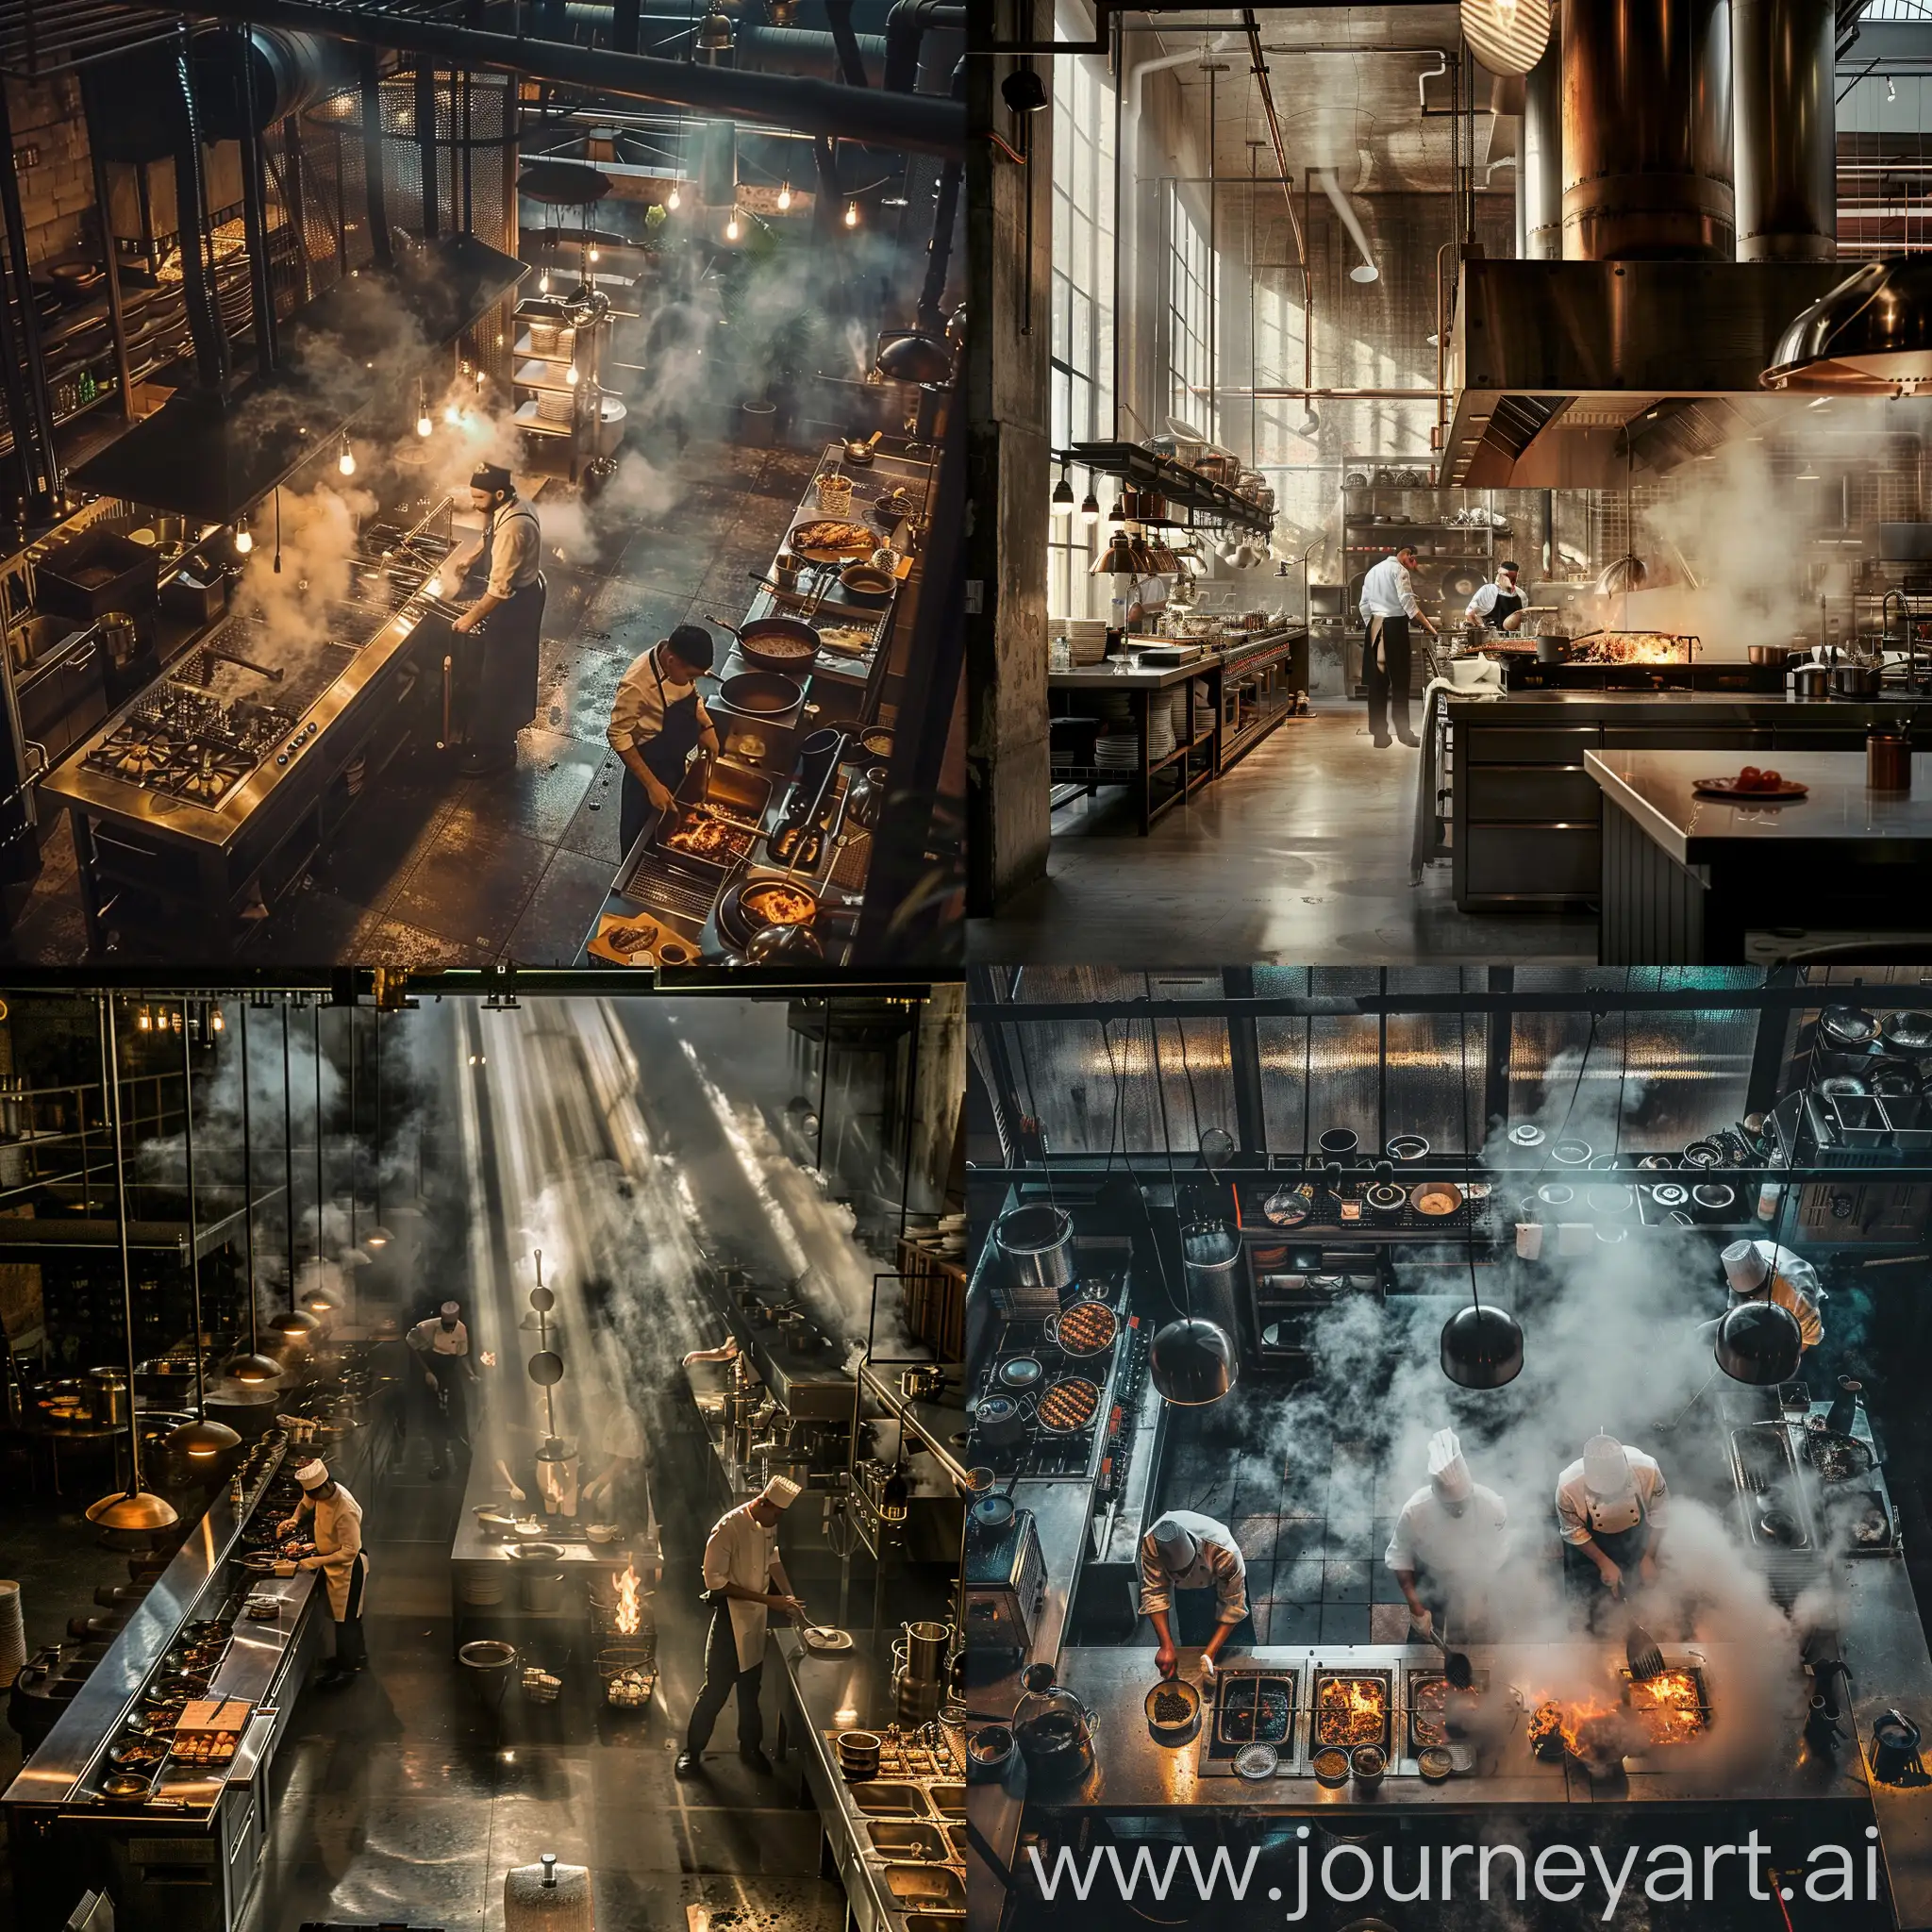 Professional-Chefs-Cooking-in-Artistic-Industrial-Kitchen